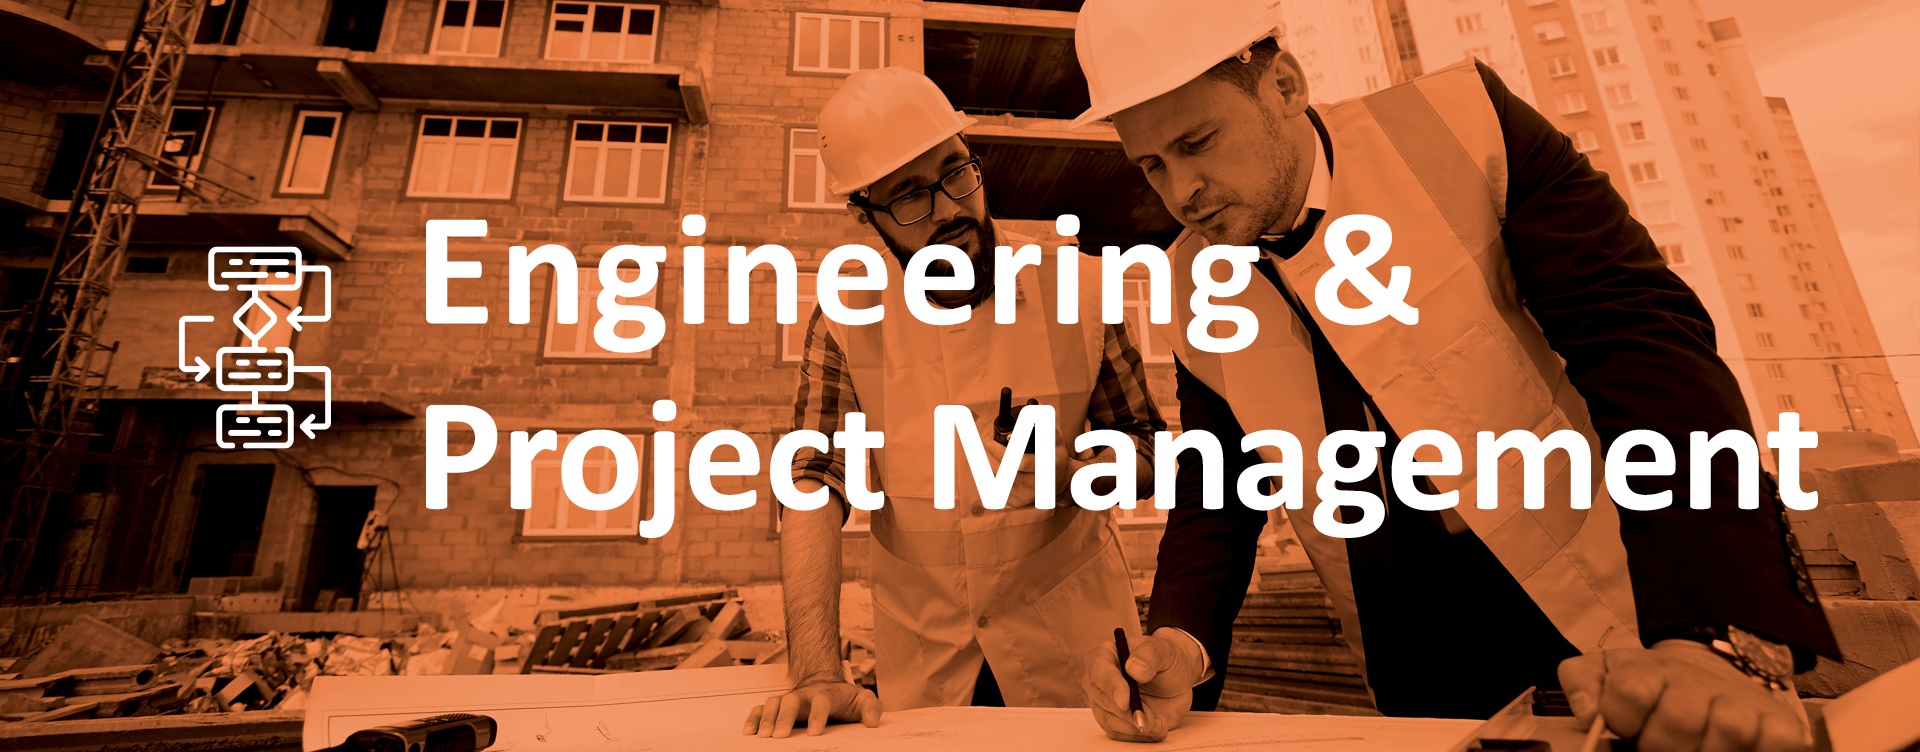 Engineering & Project Management